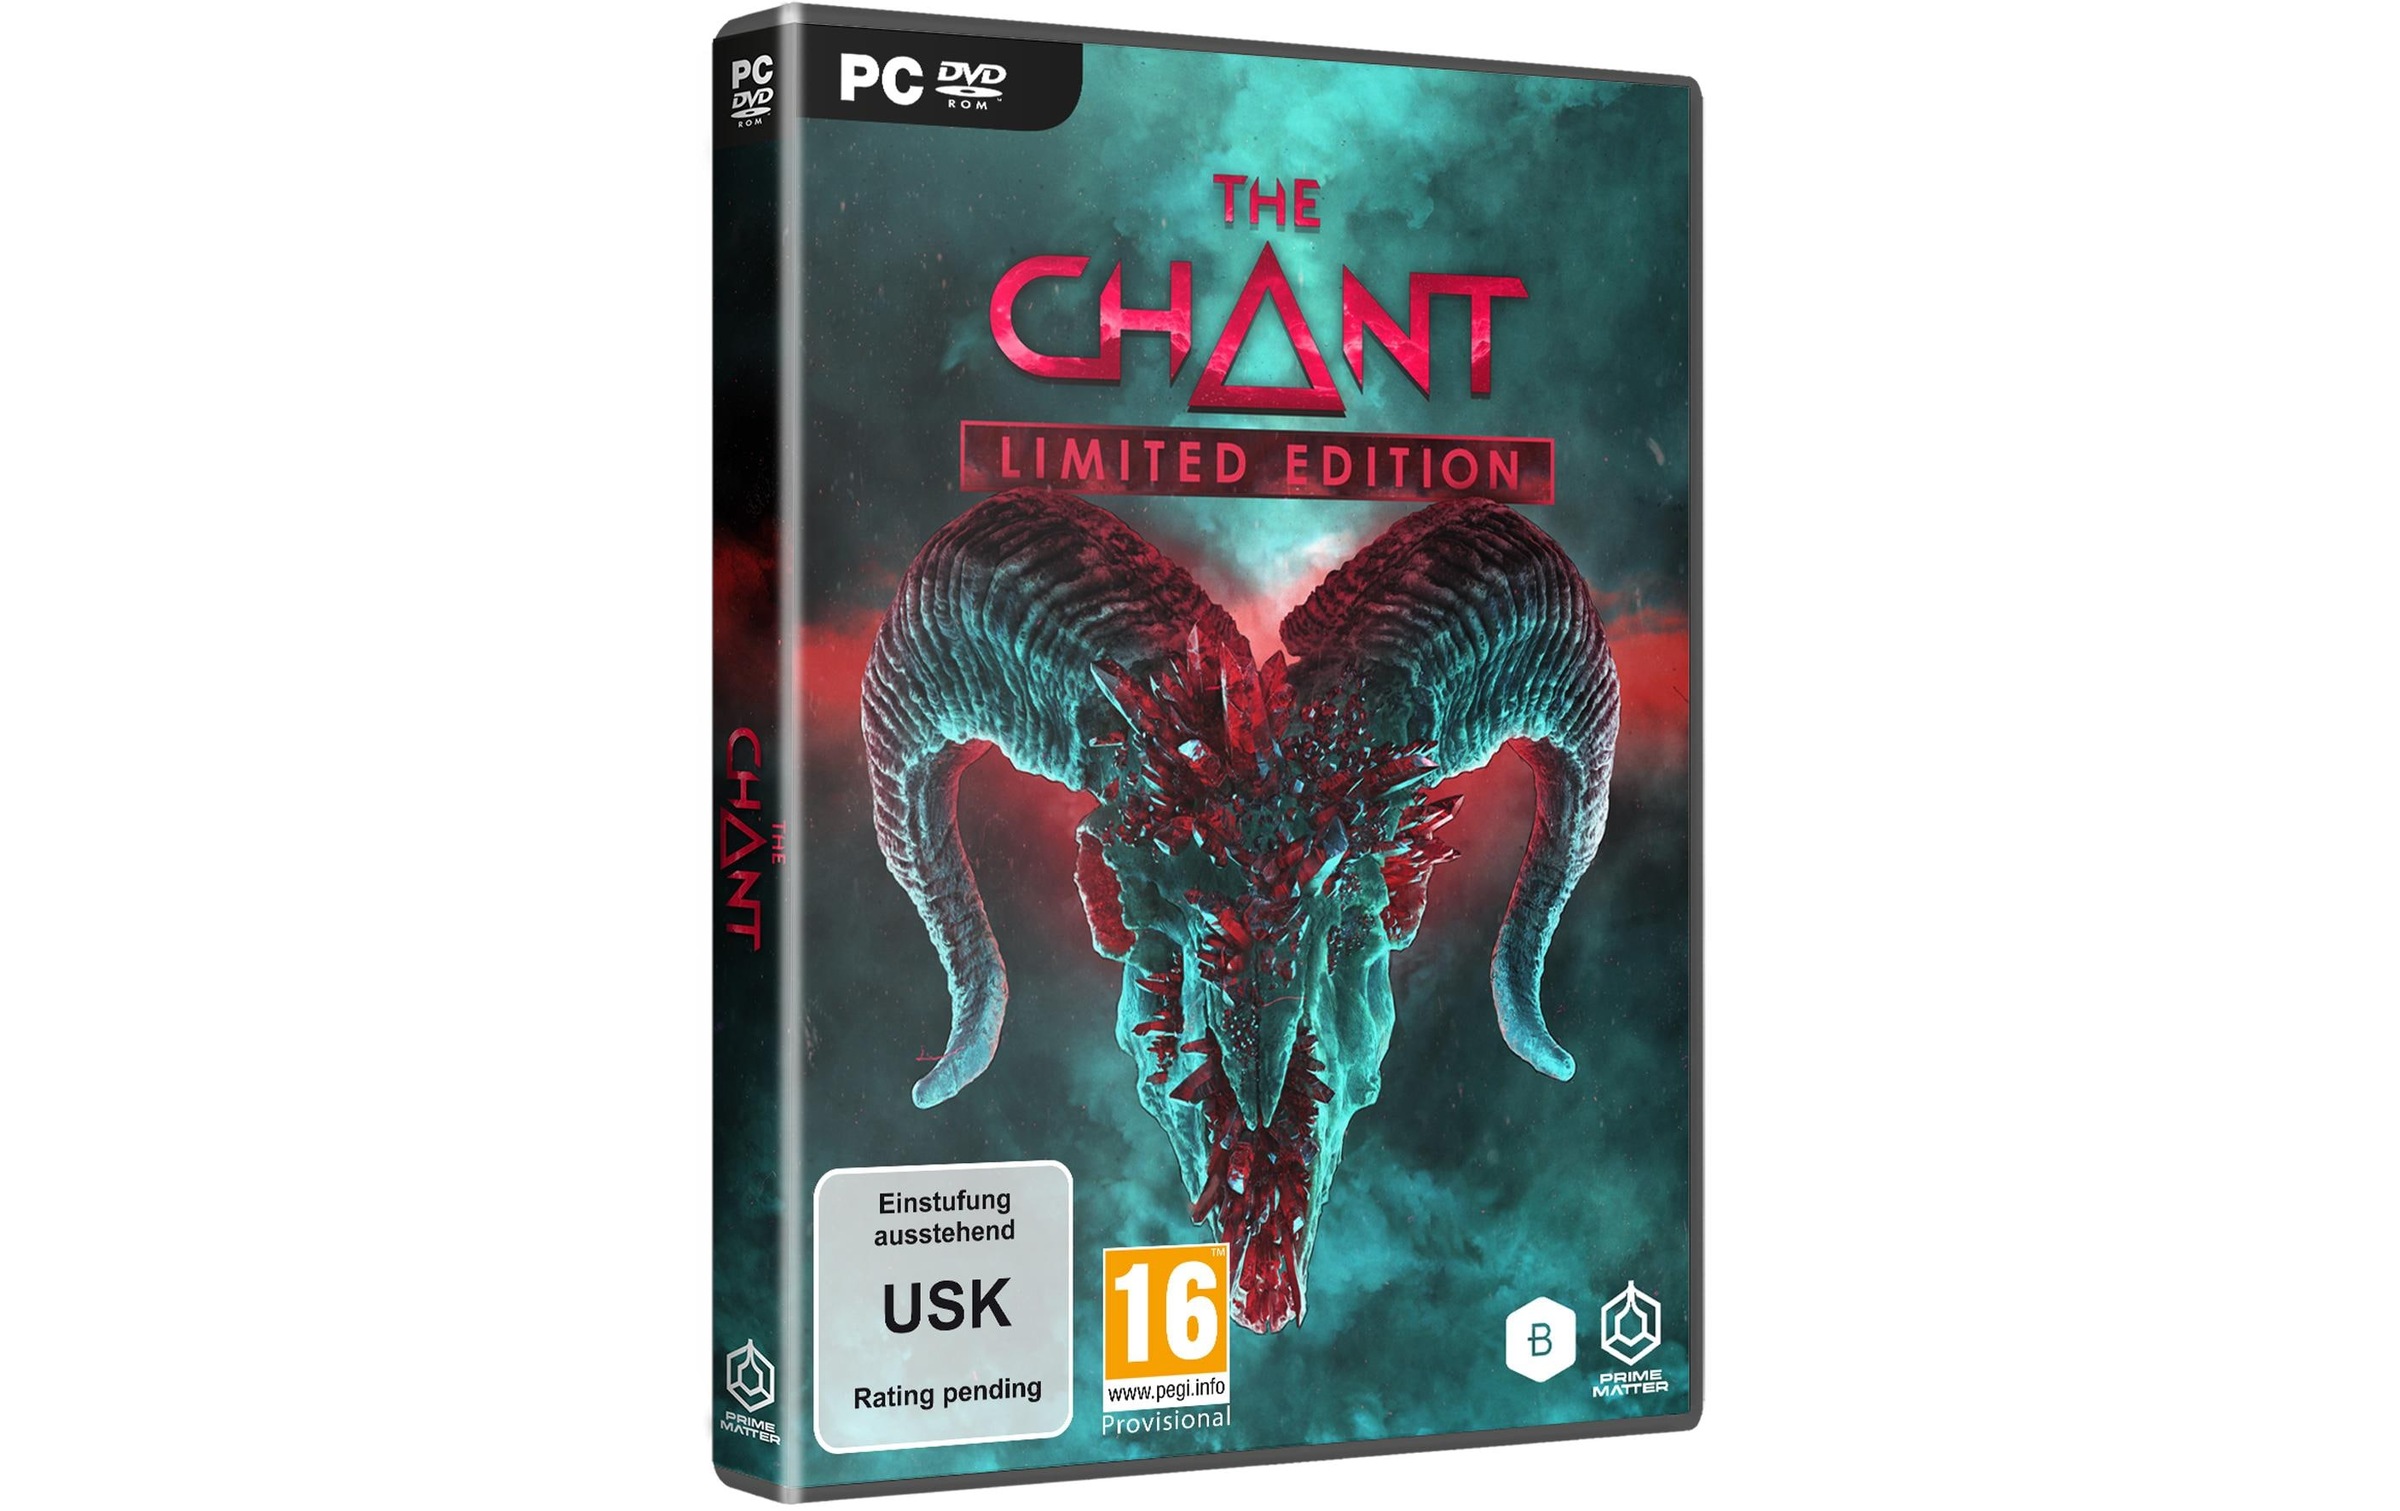 Spielesoftware »GAME The Chant Limited Edition«, PC